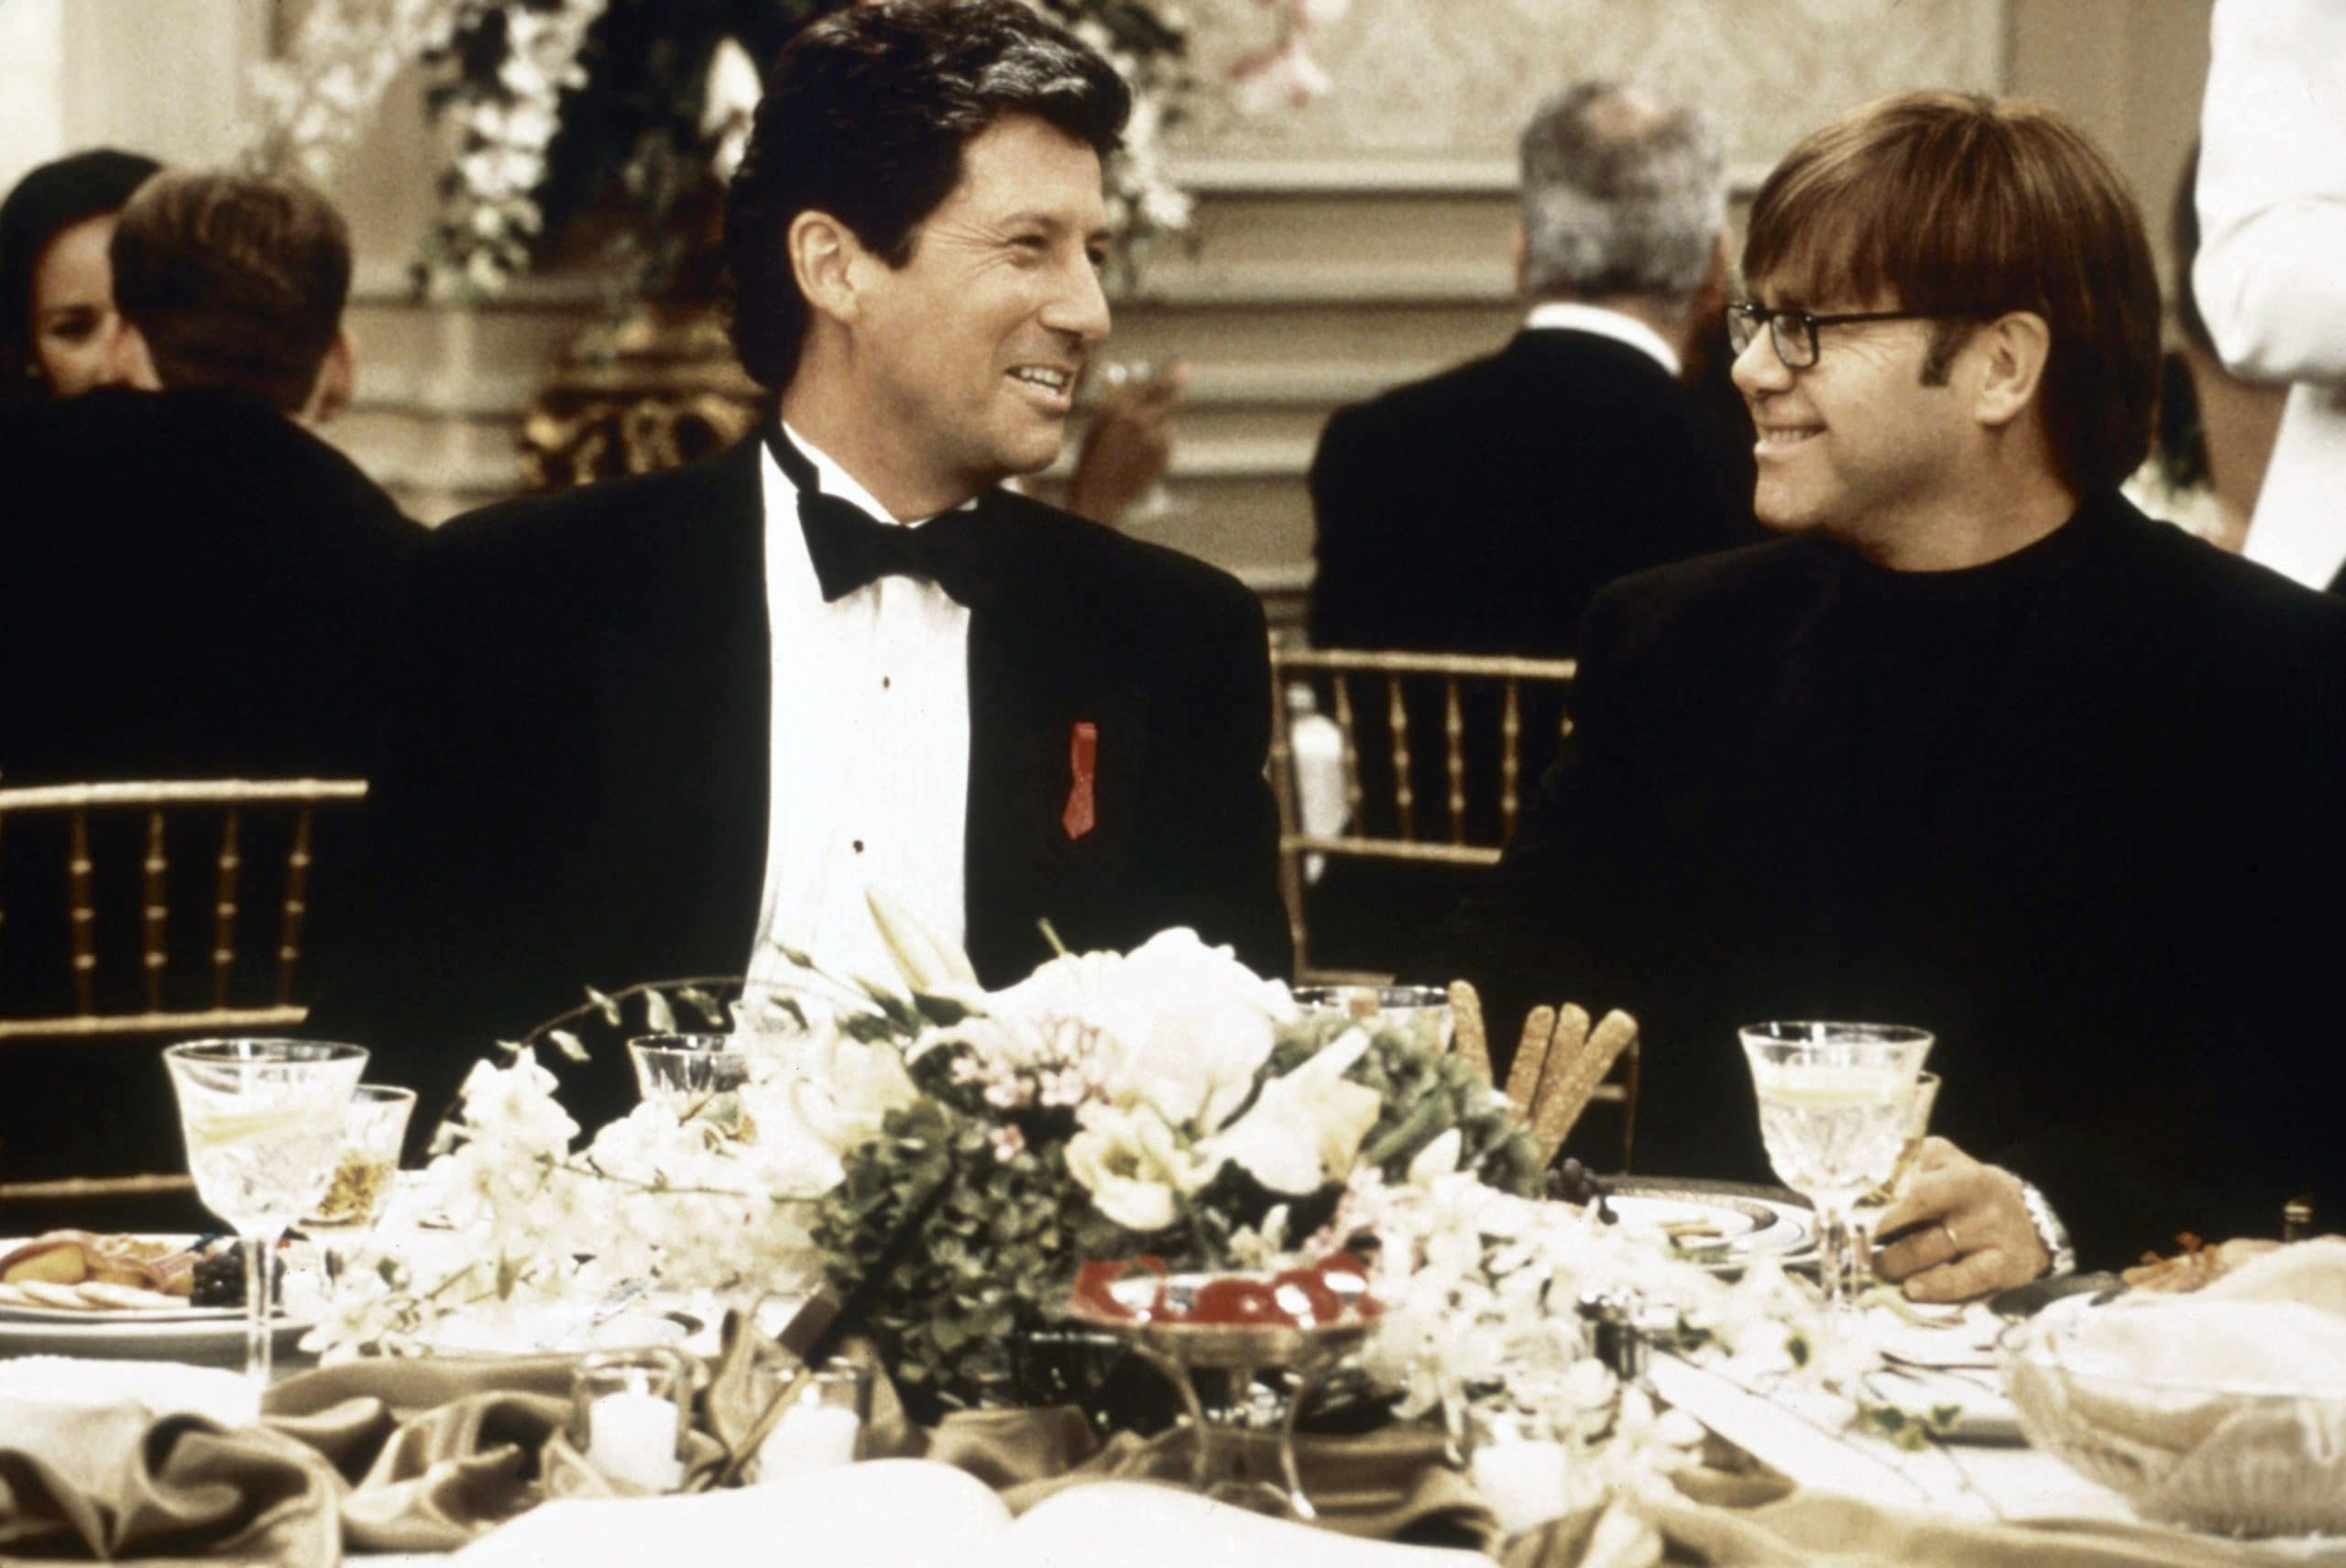 THE NANNY, from left: Charles Shaughnessy, Elton John, 'First Date,'